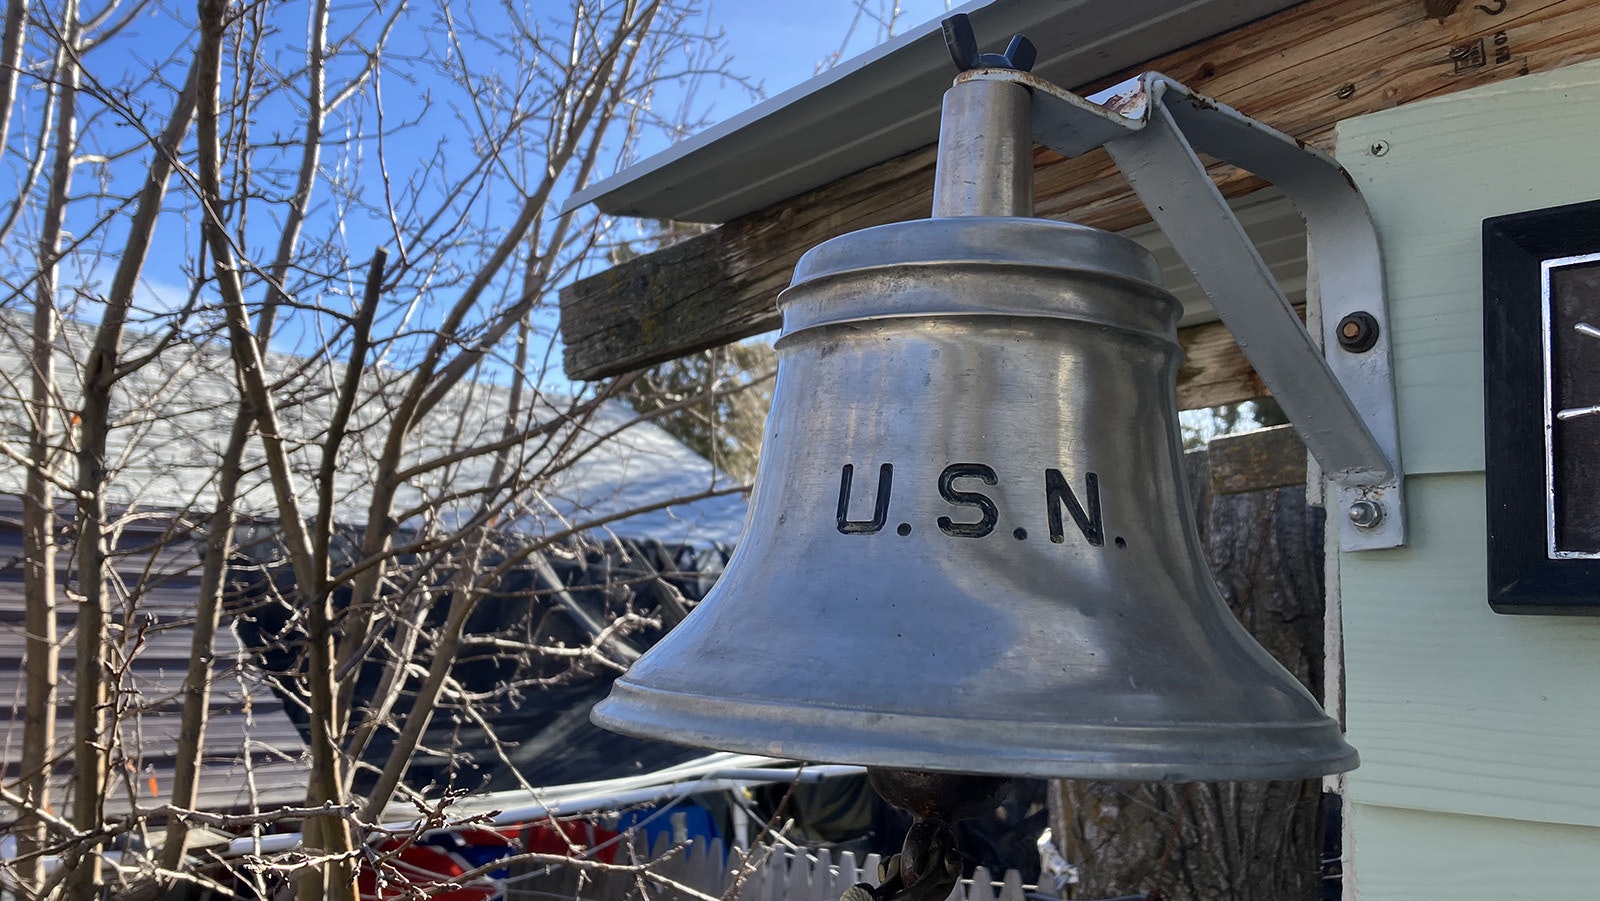 An original bell off the USS Currituck is mounted on the Dickersons’ porch to welcome visitors.